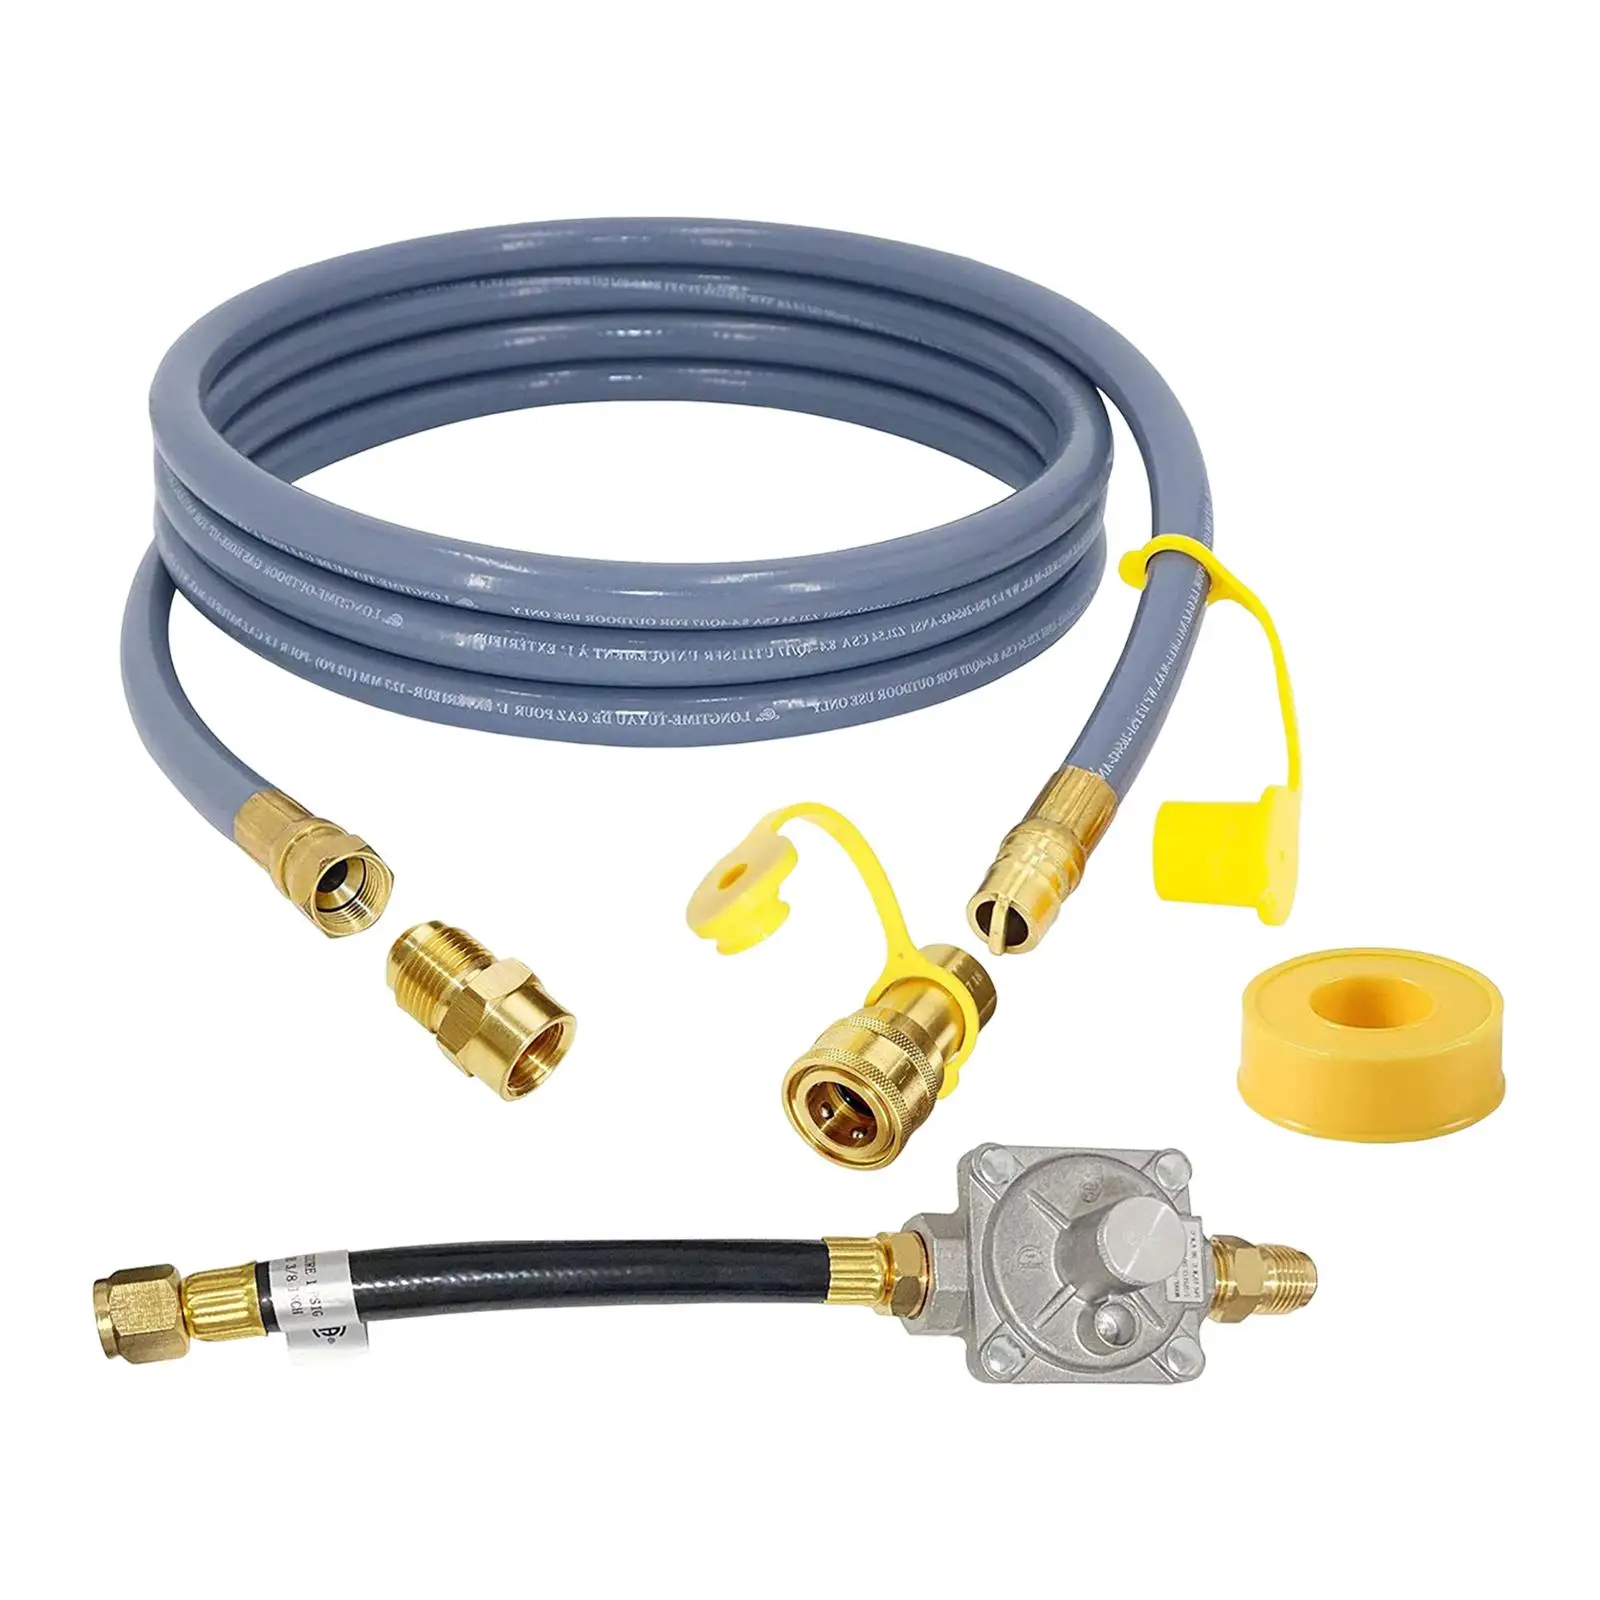 10 Feet 1/2 inch Natural Gas Hose with Quick Connect Fitting Propane to Natural Gas Conversion Kit for Grill Patio Heater